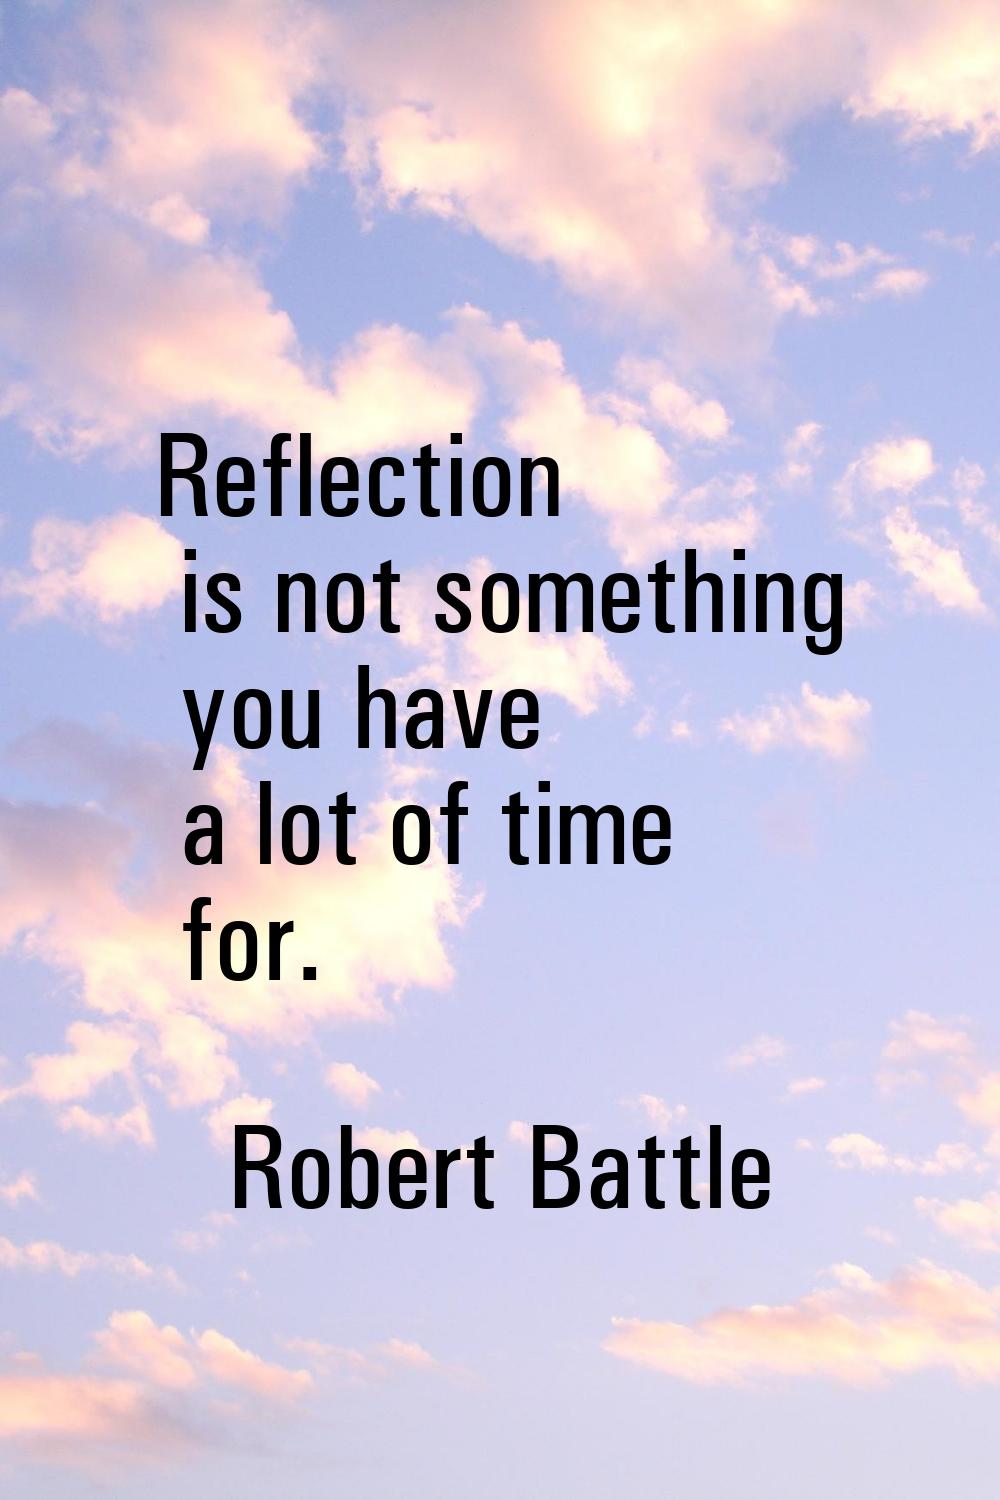 Reflection is not something you have a lot of time for.